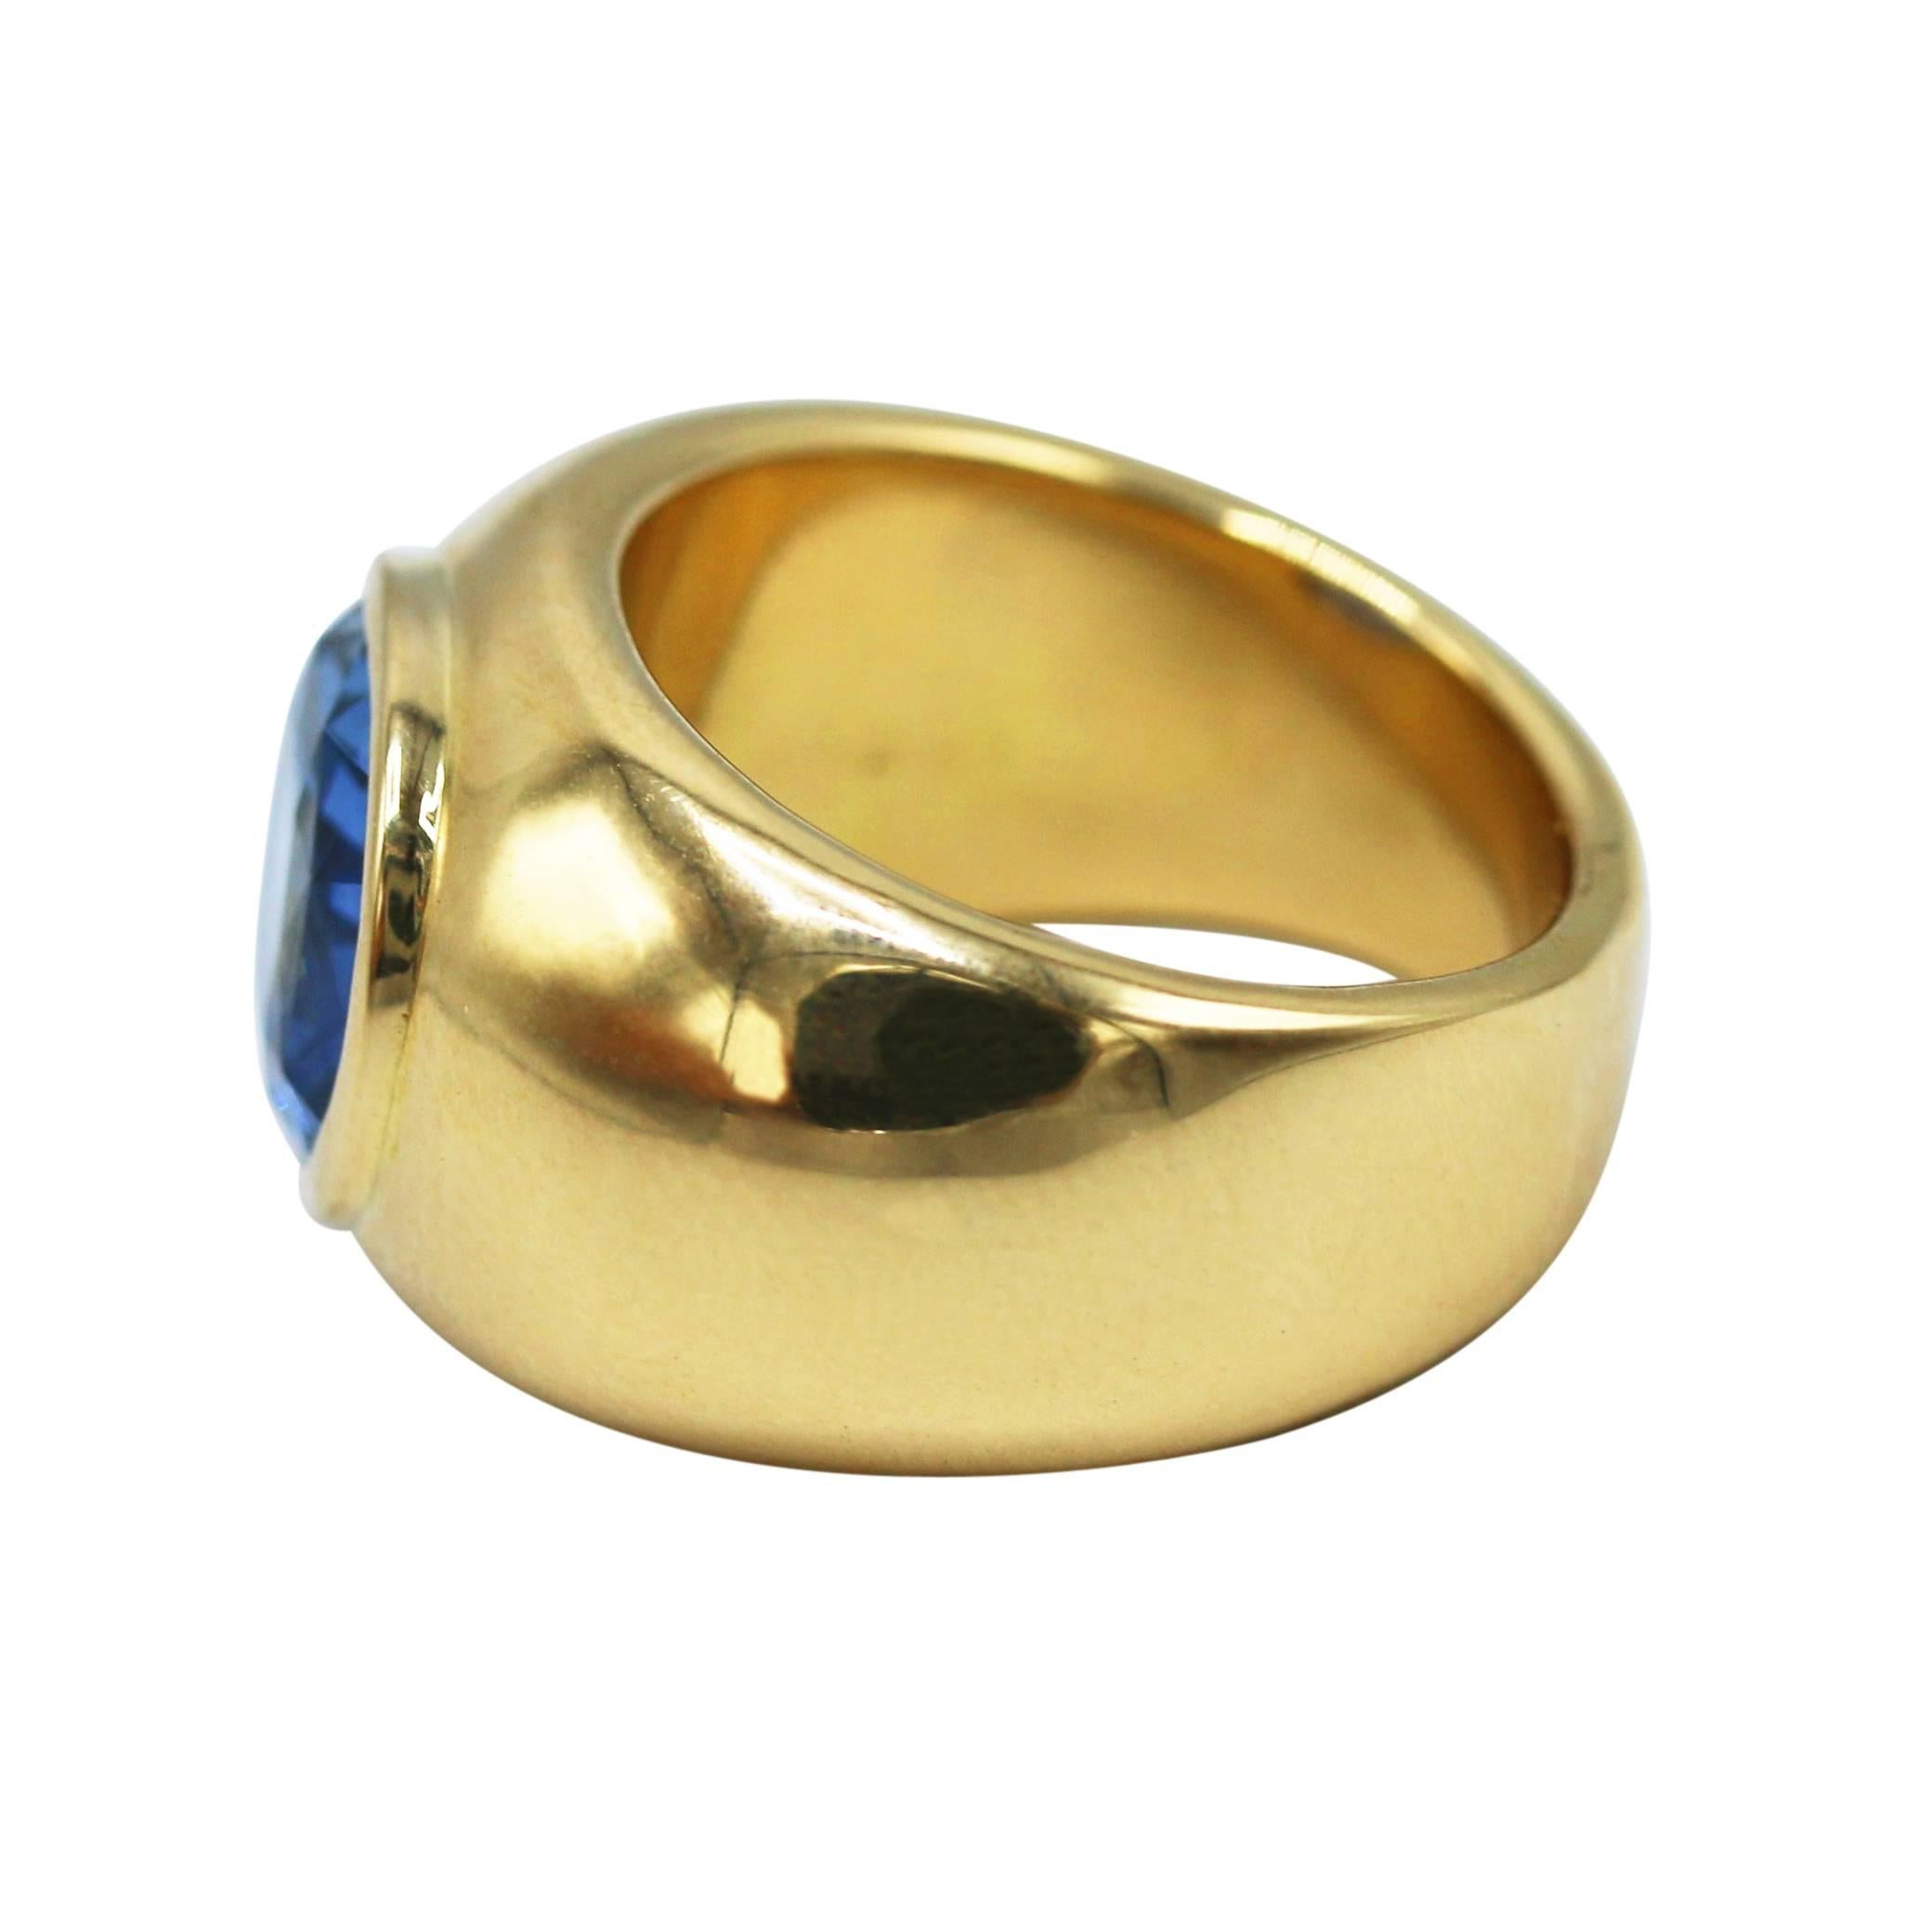 18 karat yellow gold and sapphire ring, the slightly tapered wide band bezel-set with an oval sapphire weighing 8.23 carats, gross weight 20.3 grams, size 7, measuring 1 by 1 by 1/2 inches. The sapphire is accompanied by an AGL report stating that